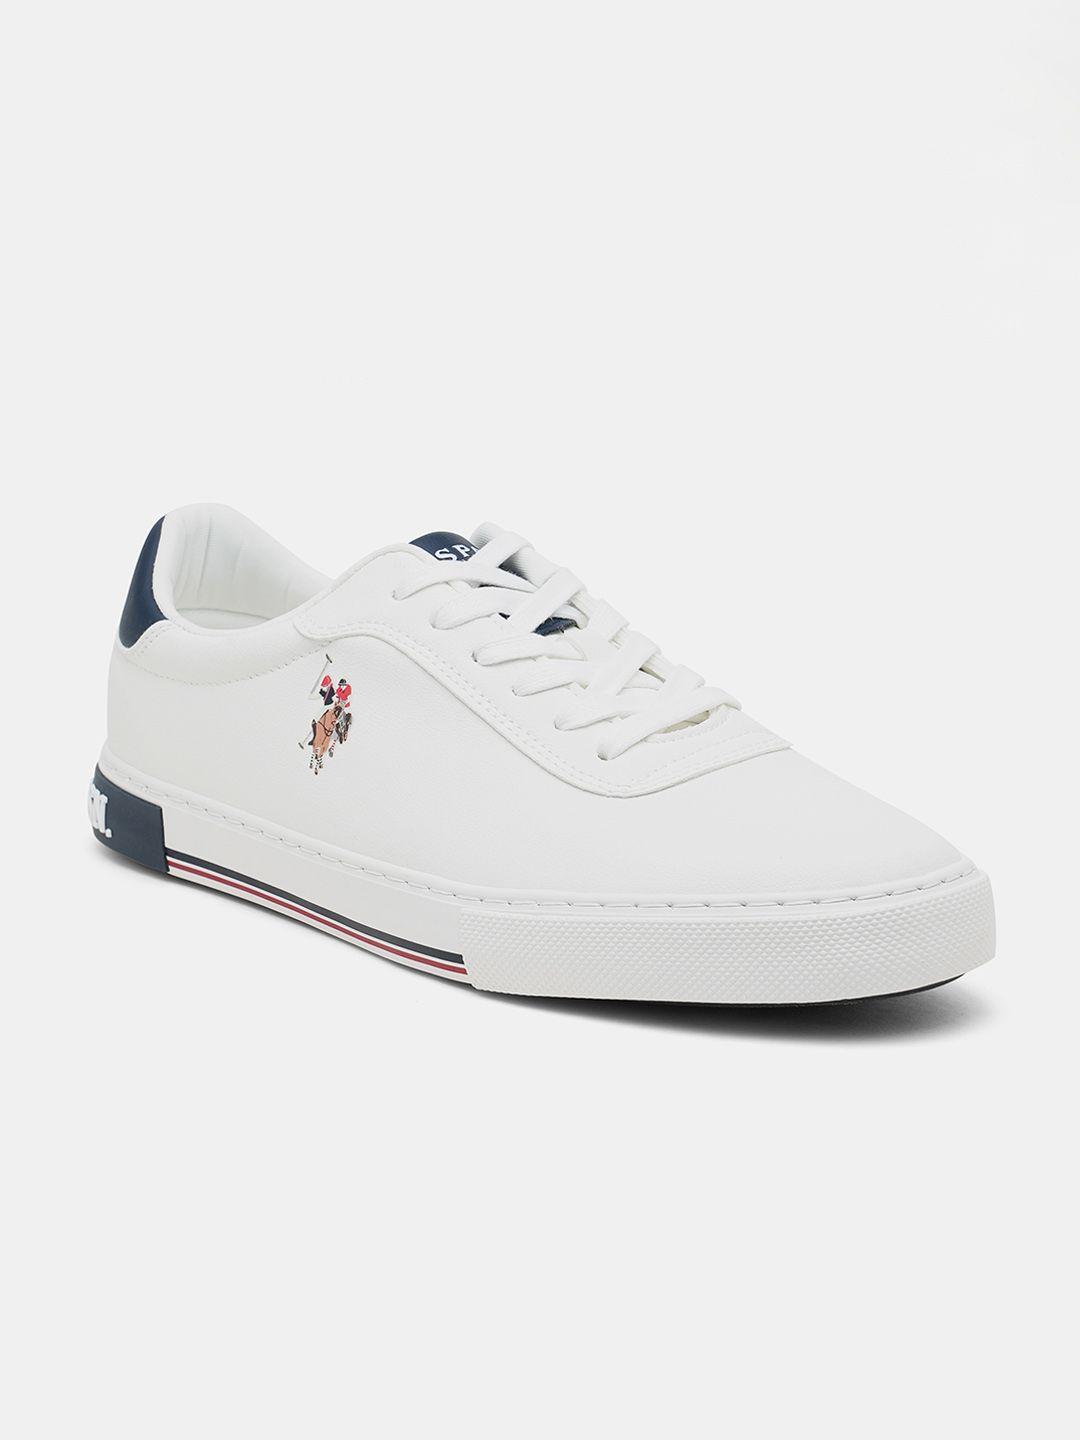 u.s. polo assn. men lace-up sneakers